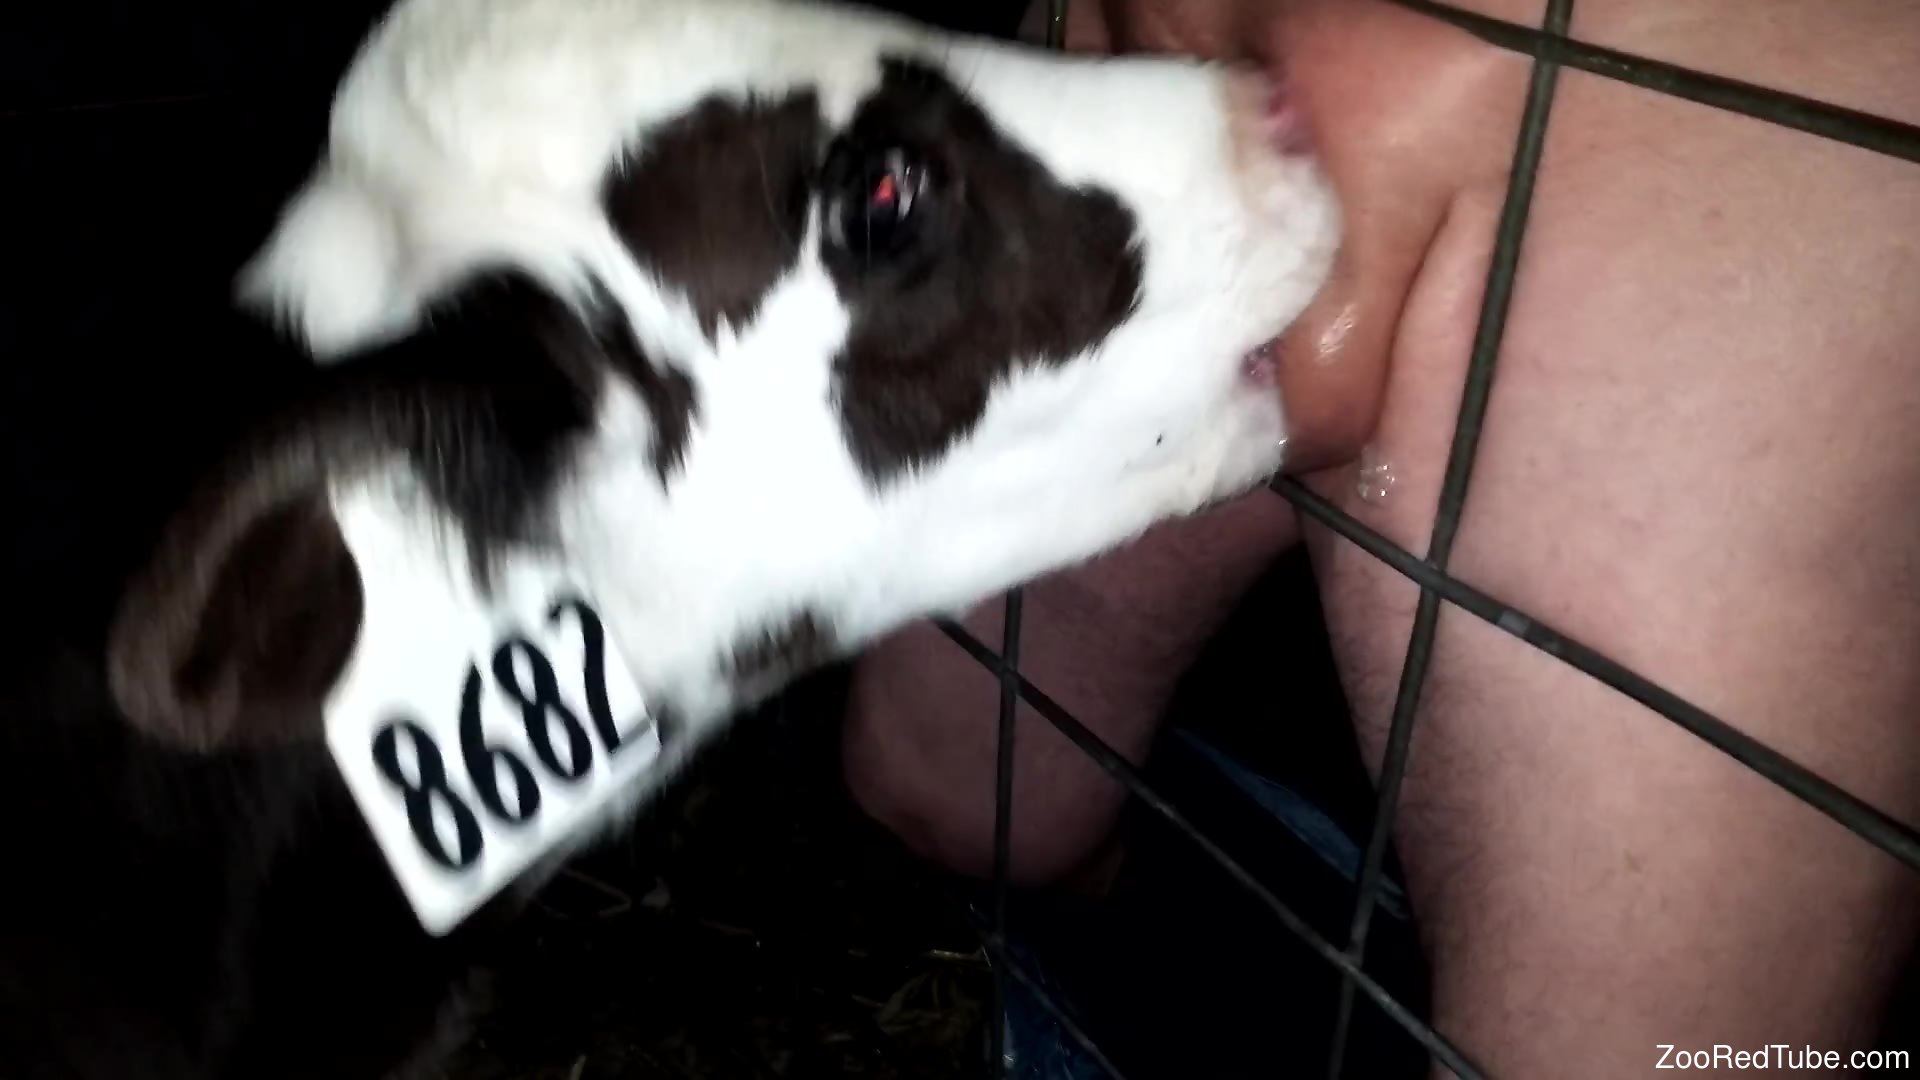 Xxx Caw And Boy Sex - Man sticks his dick through the fence for this baby cow